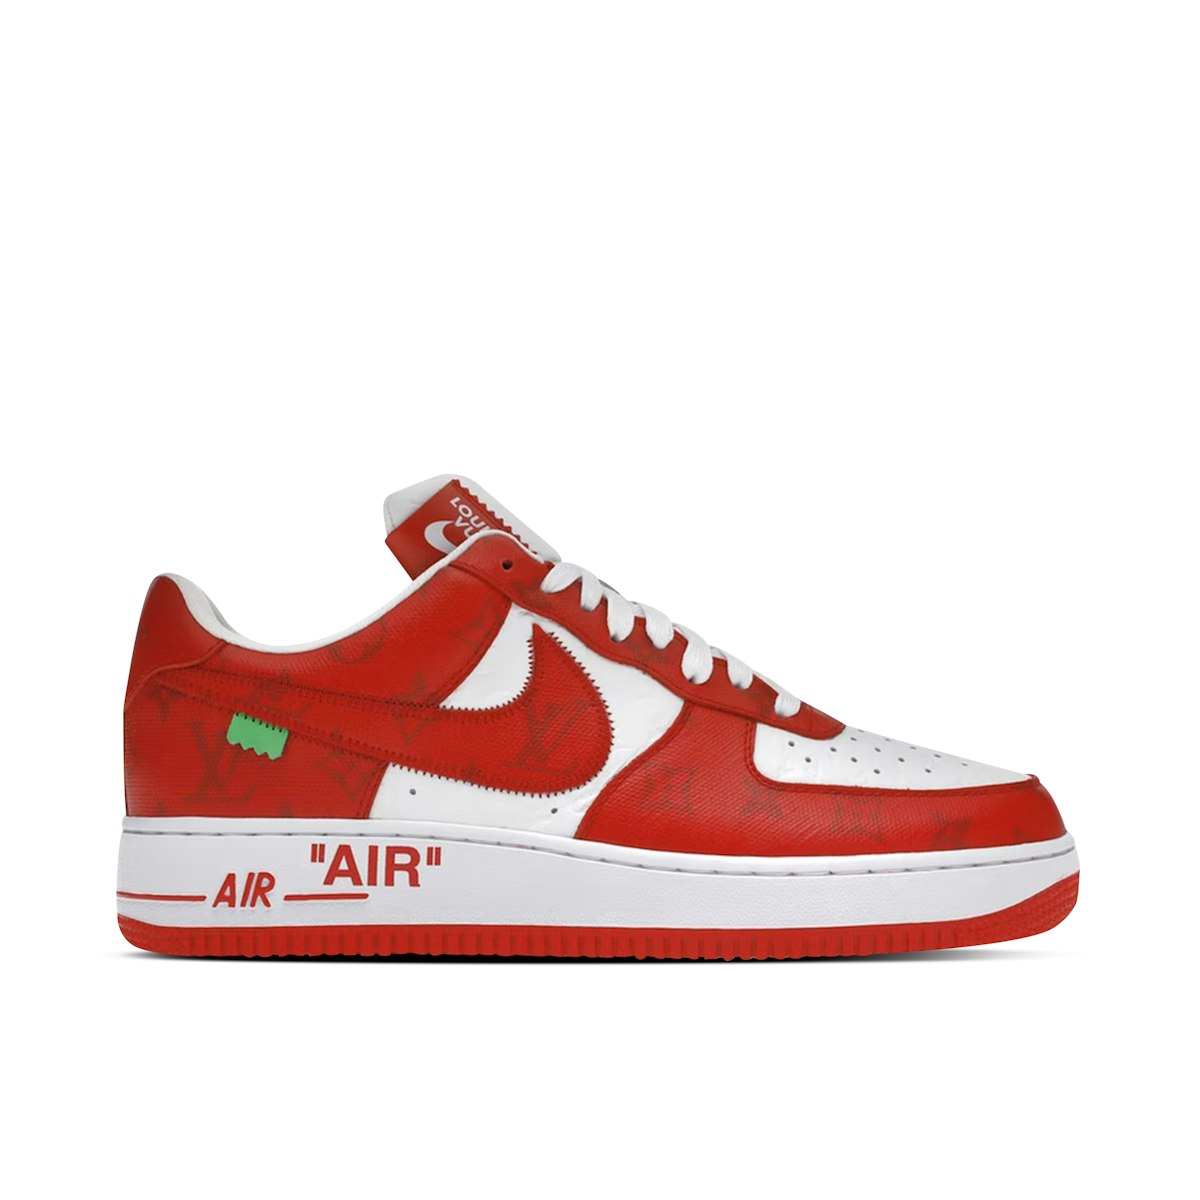 Heard it's payday! 💰 Louis Vuitton Nike Air Force 1 Low By Virgil Abloh  White Red Size 10 $7,250